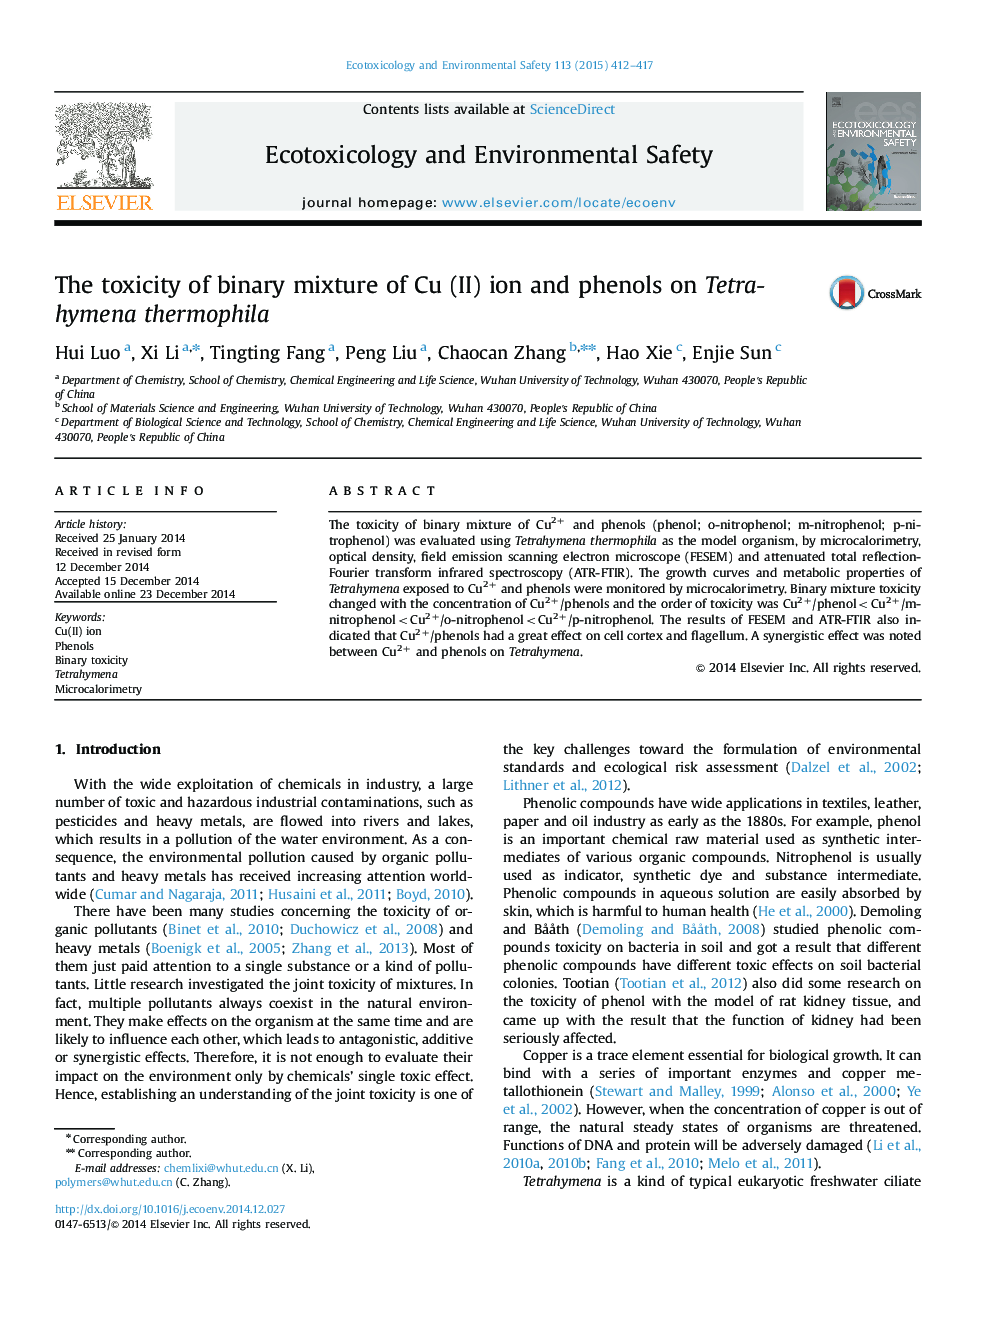 The toxicity of binary mixture of Cu (II) ion and phenols on Tetrahymena thermophila